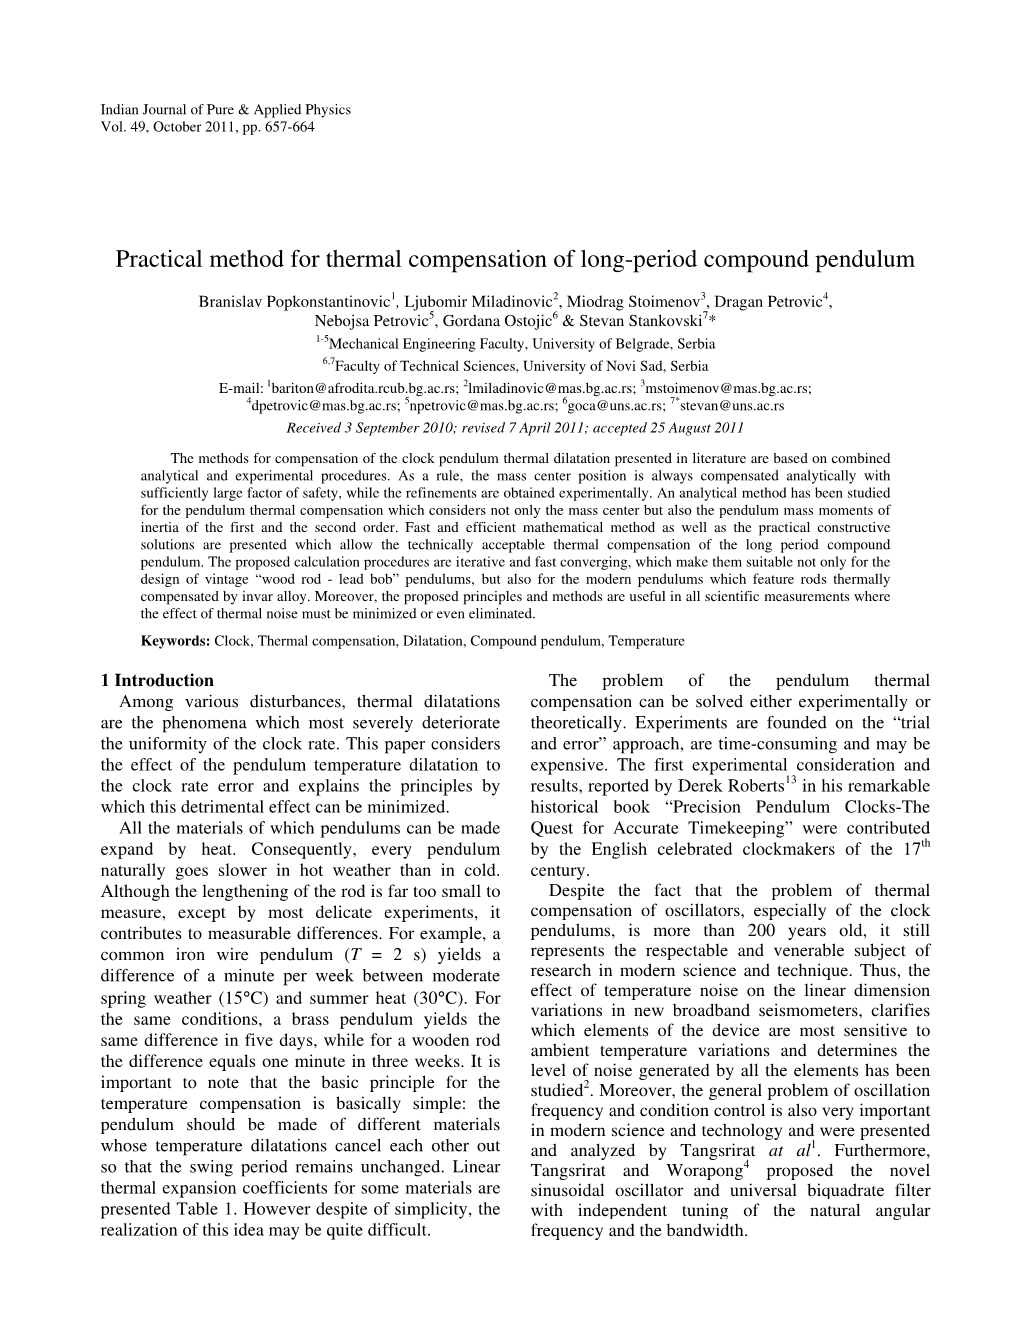 Practical Method for Thermal Compensation of Long-Period Compound Pendulum